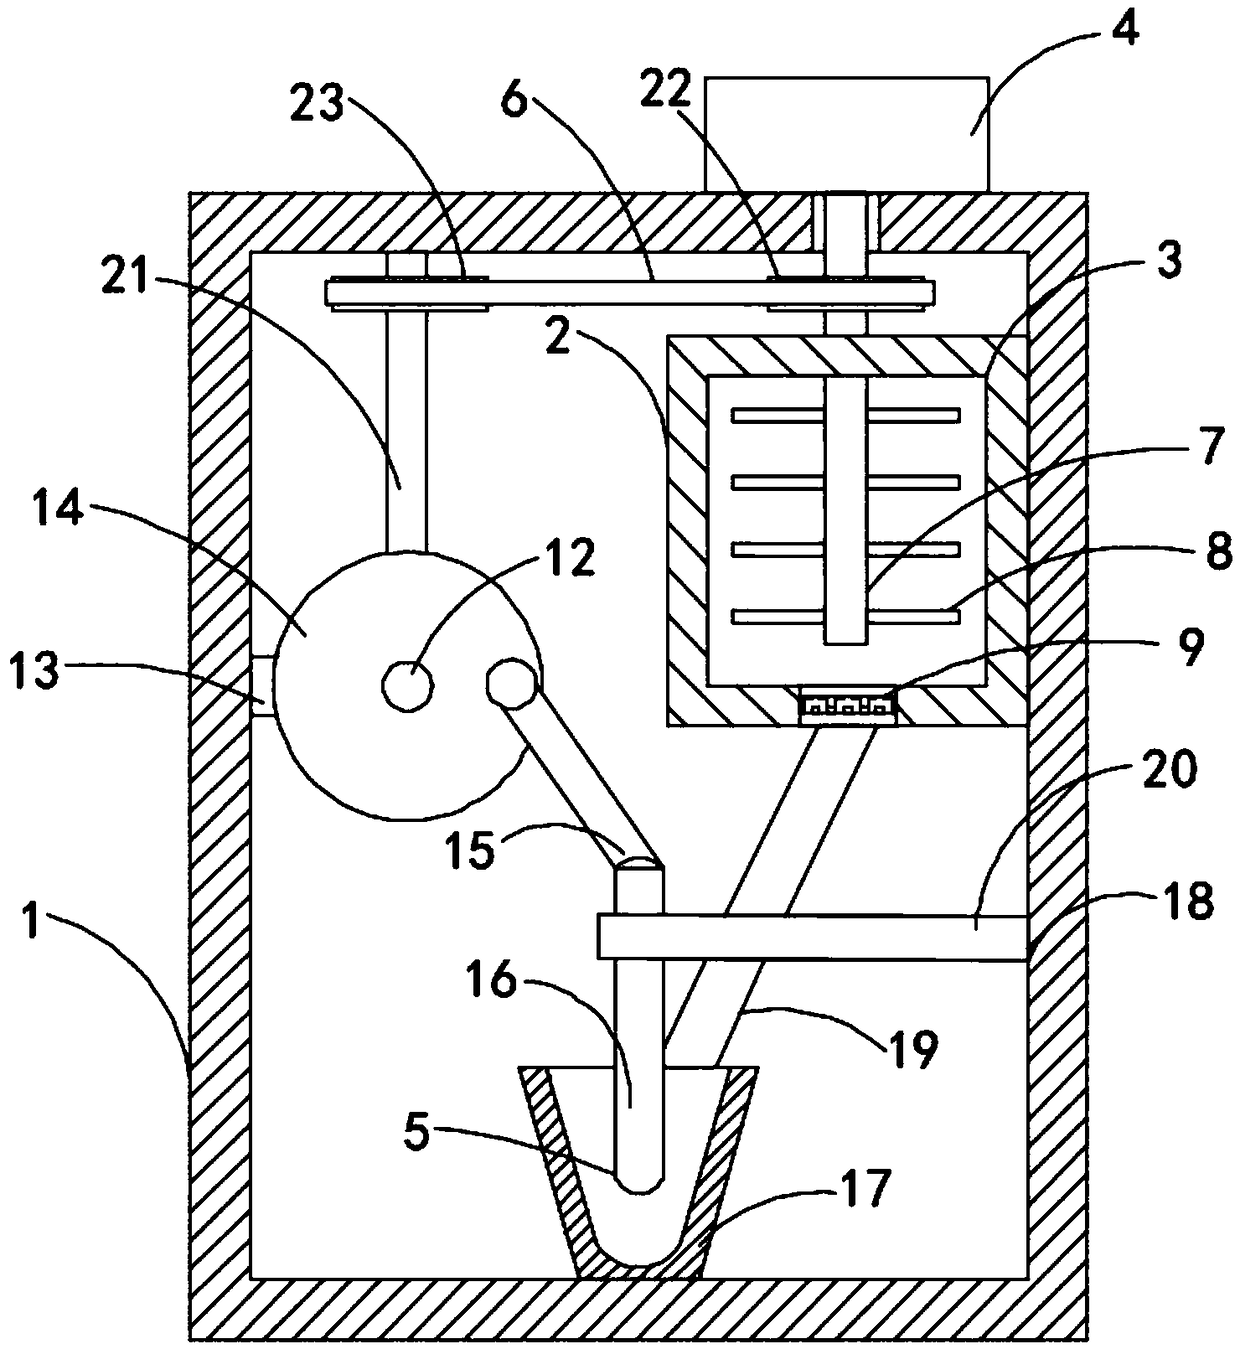 Mashing device for processing pesticide residue detecting sample